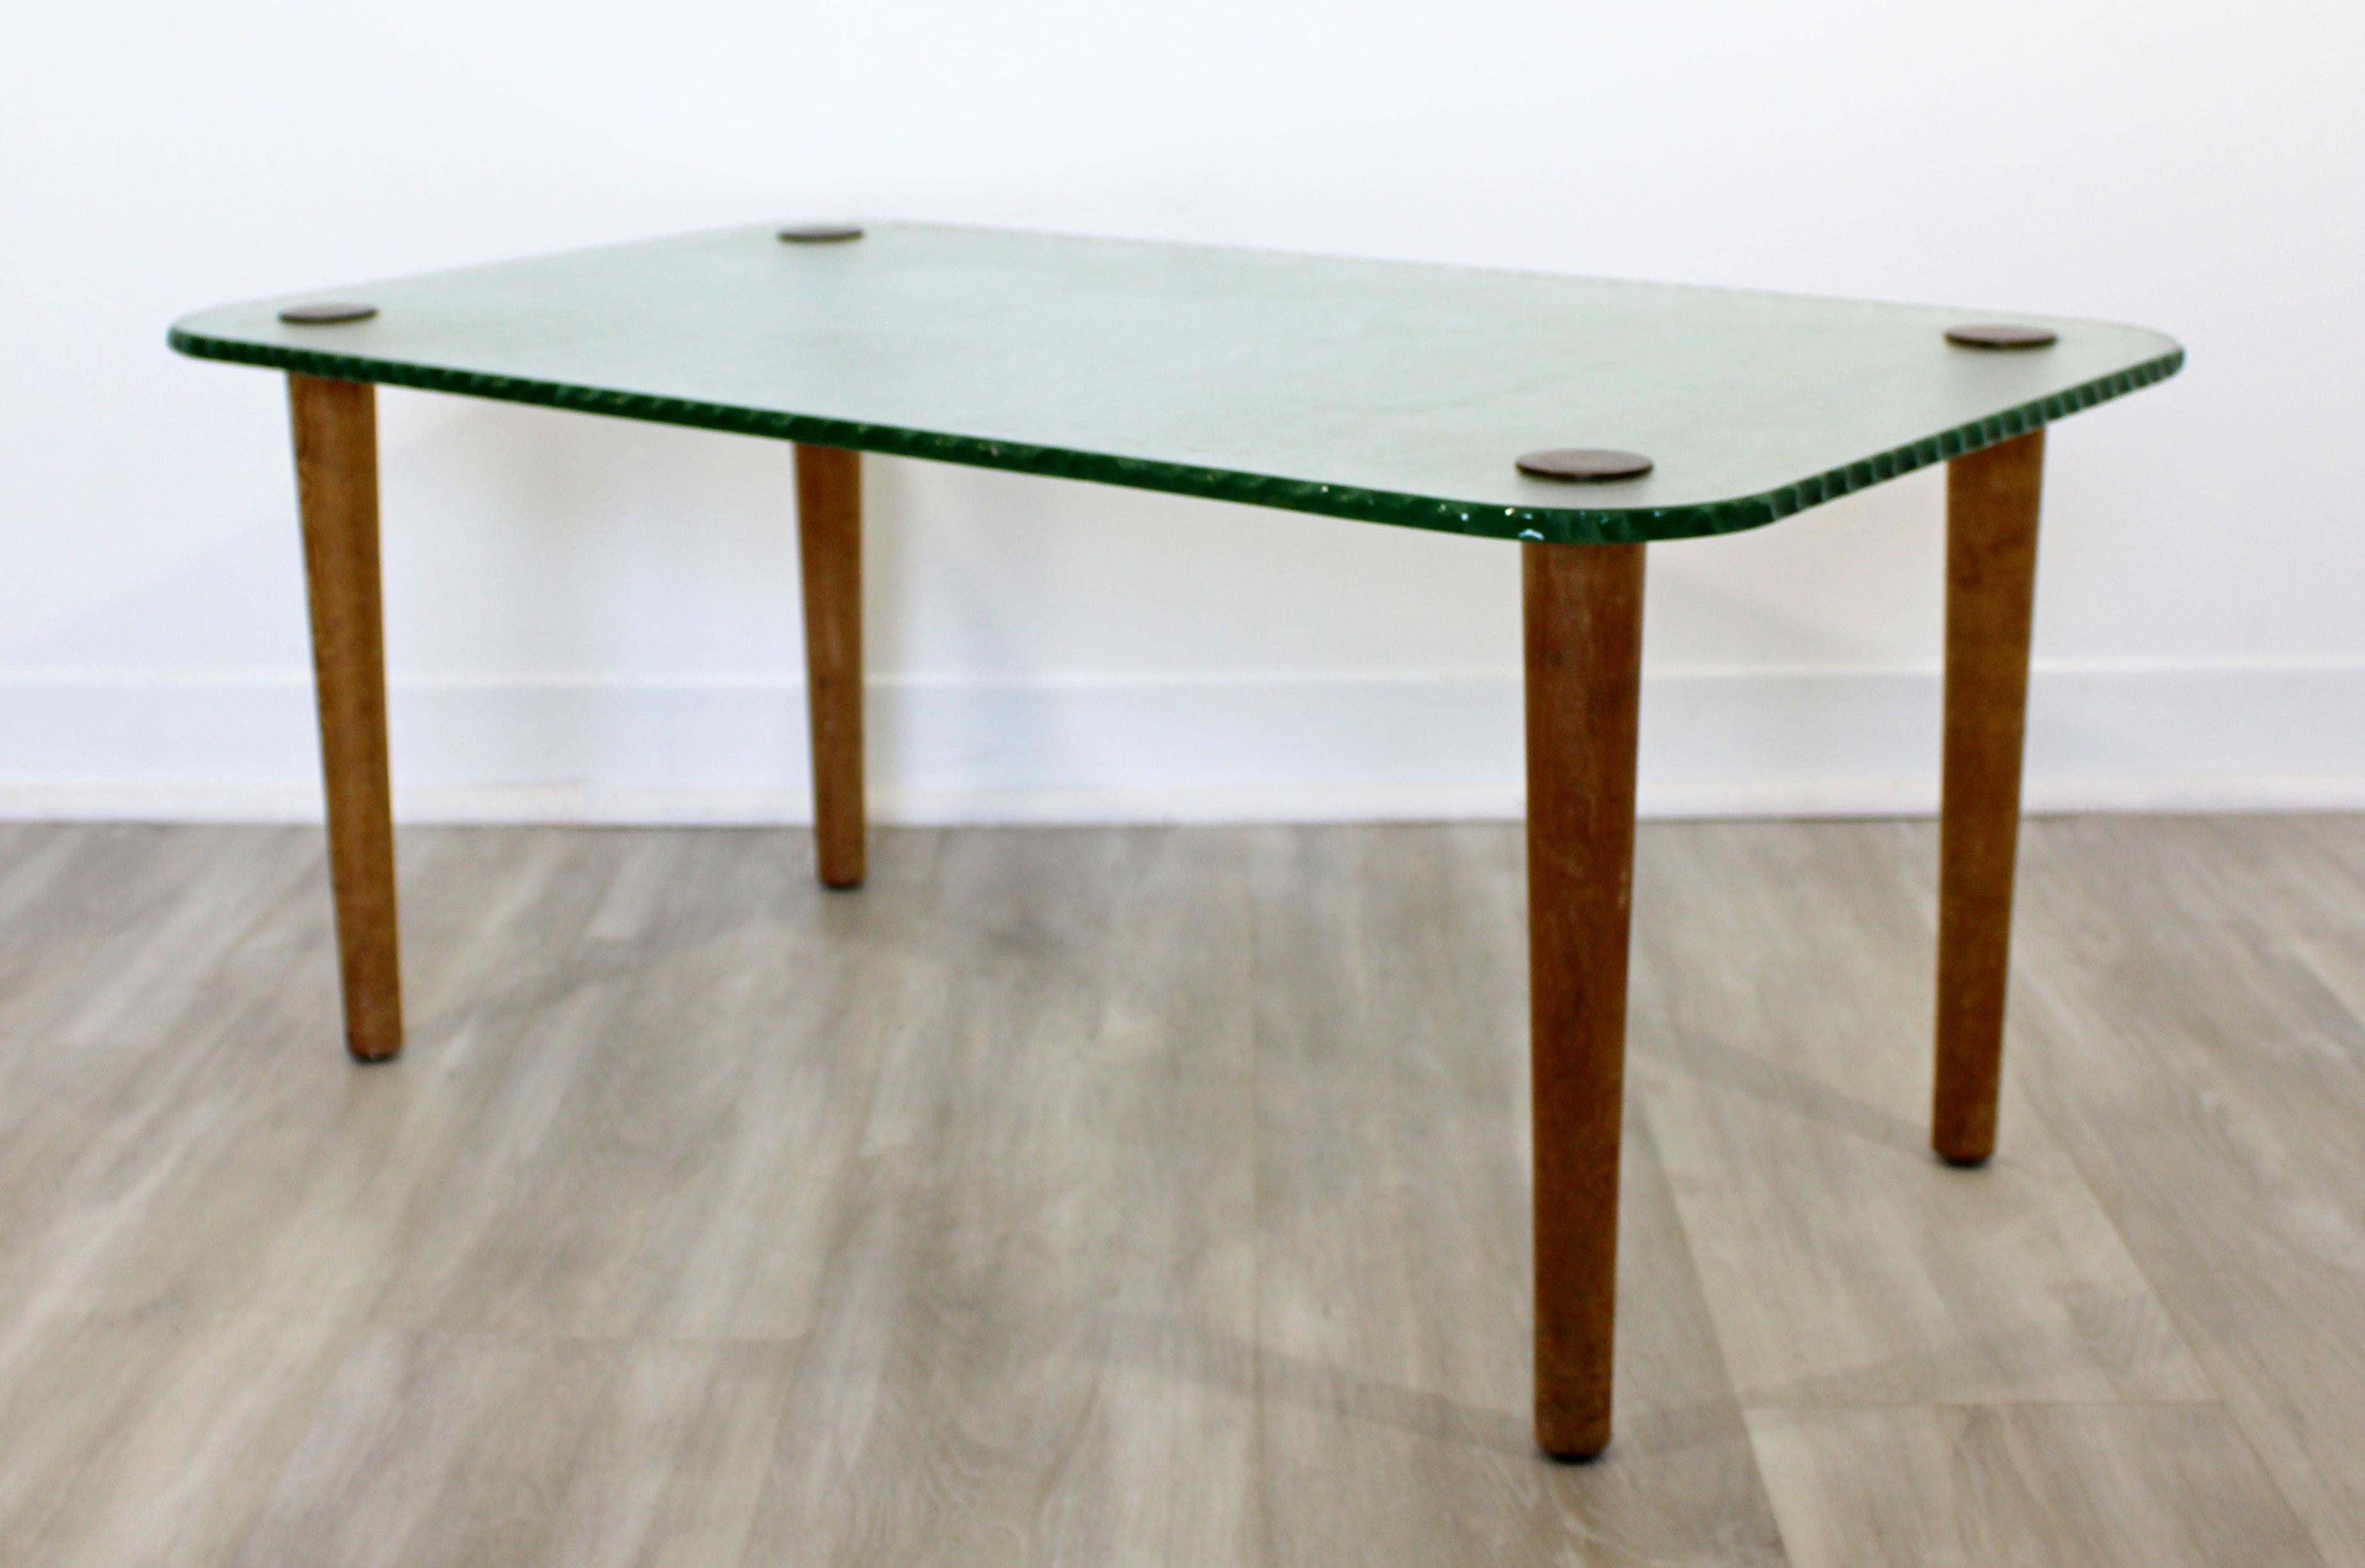 American Art Deco Wood Bronze Tempered Chipped Edge Glass Coffee Table 1940s Rohde Style